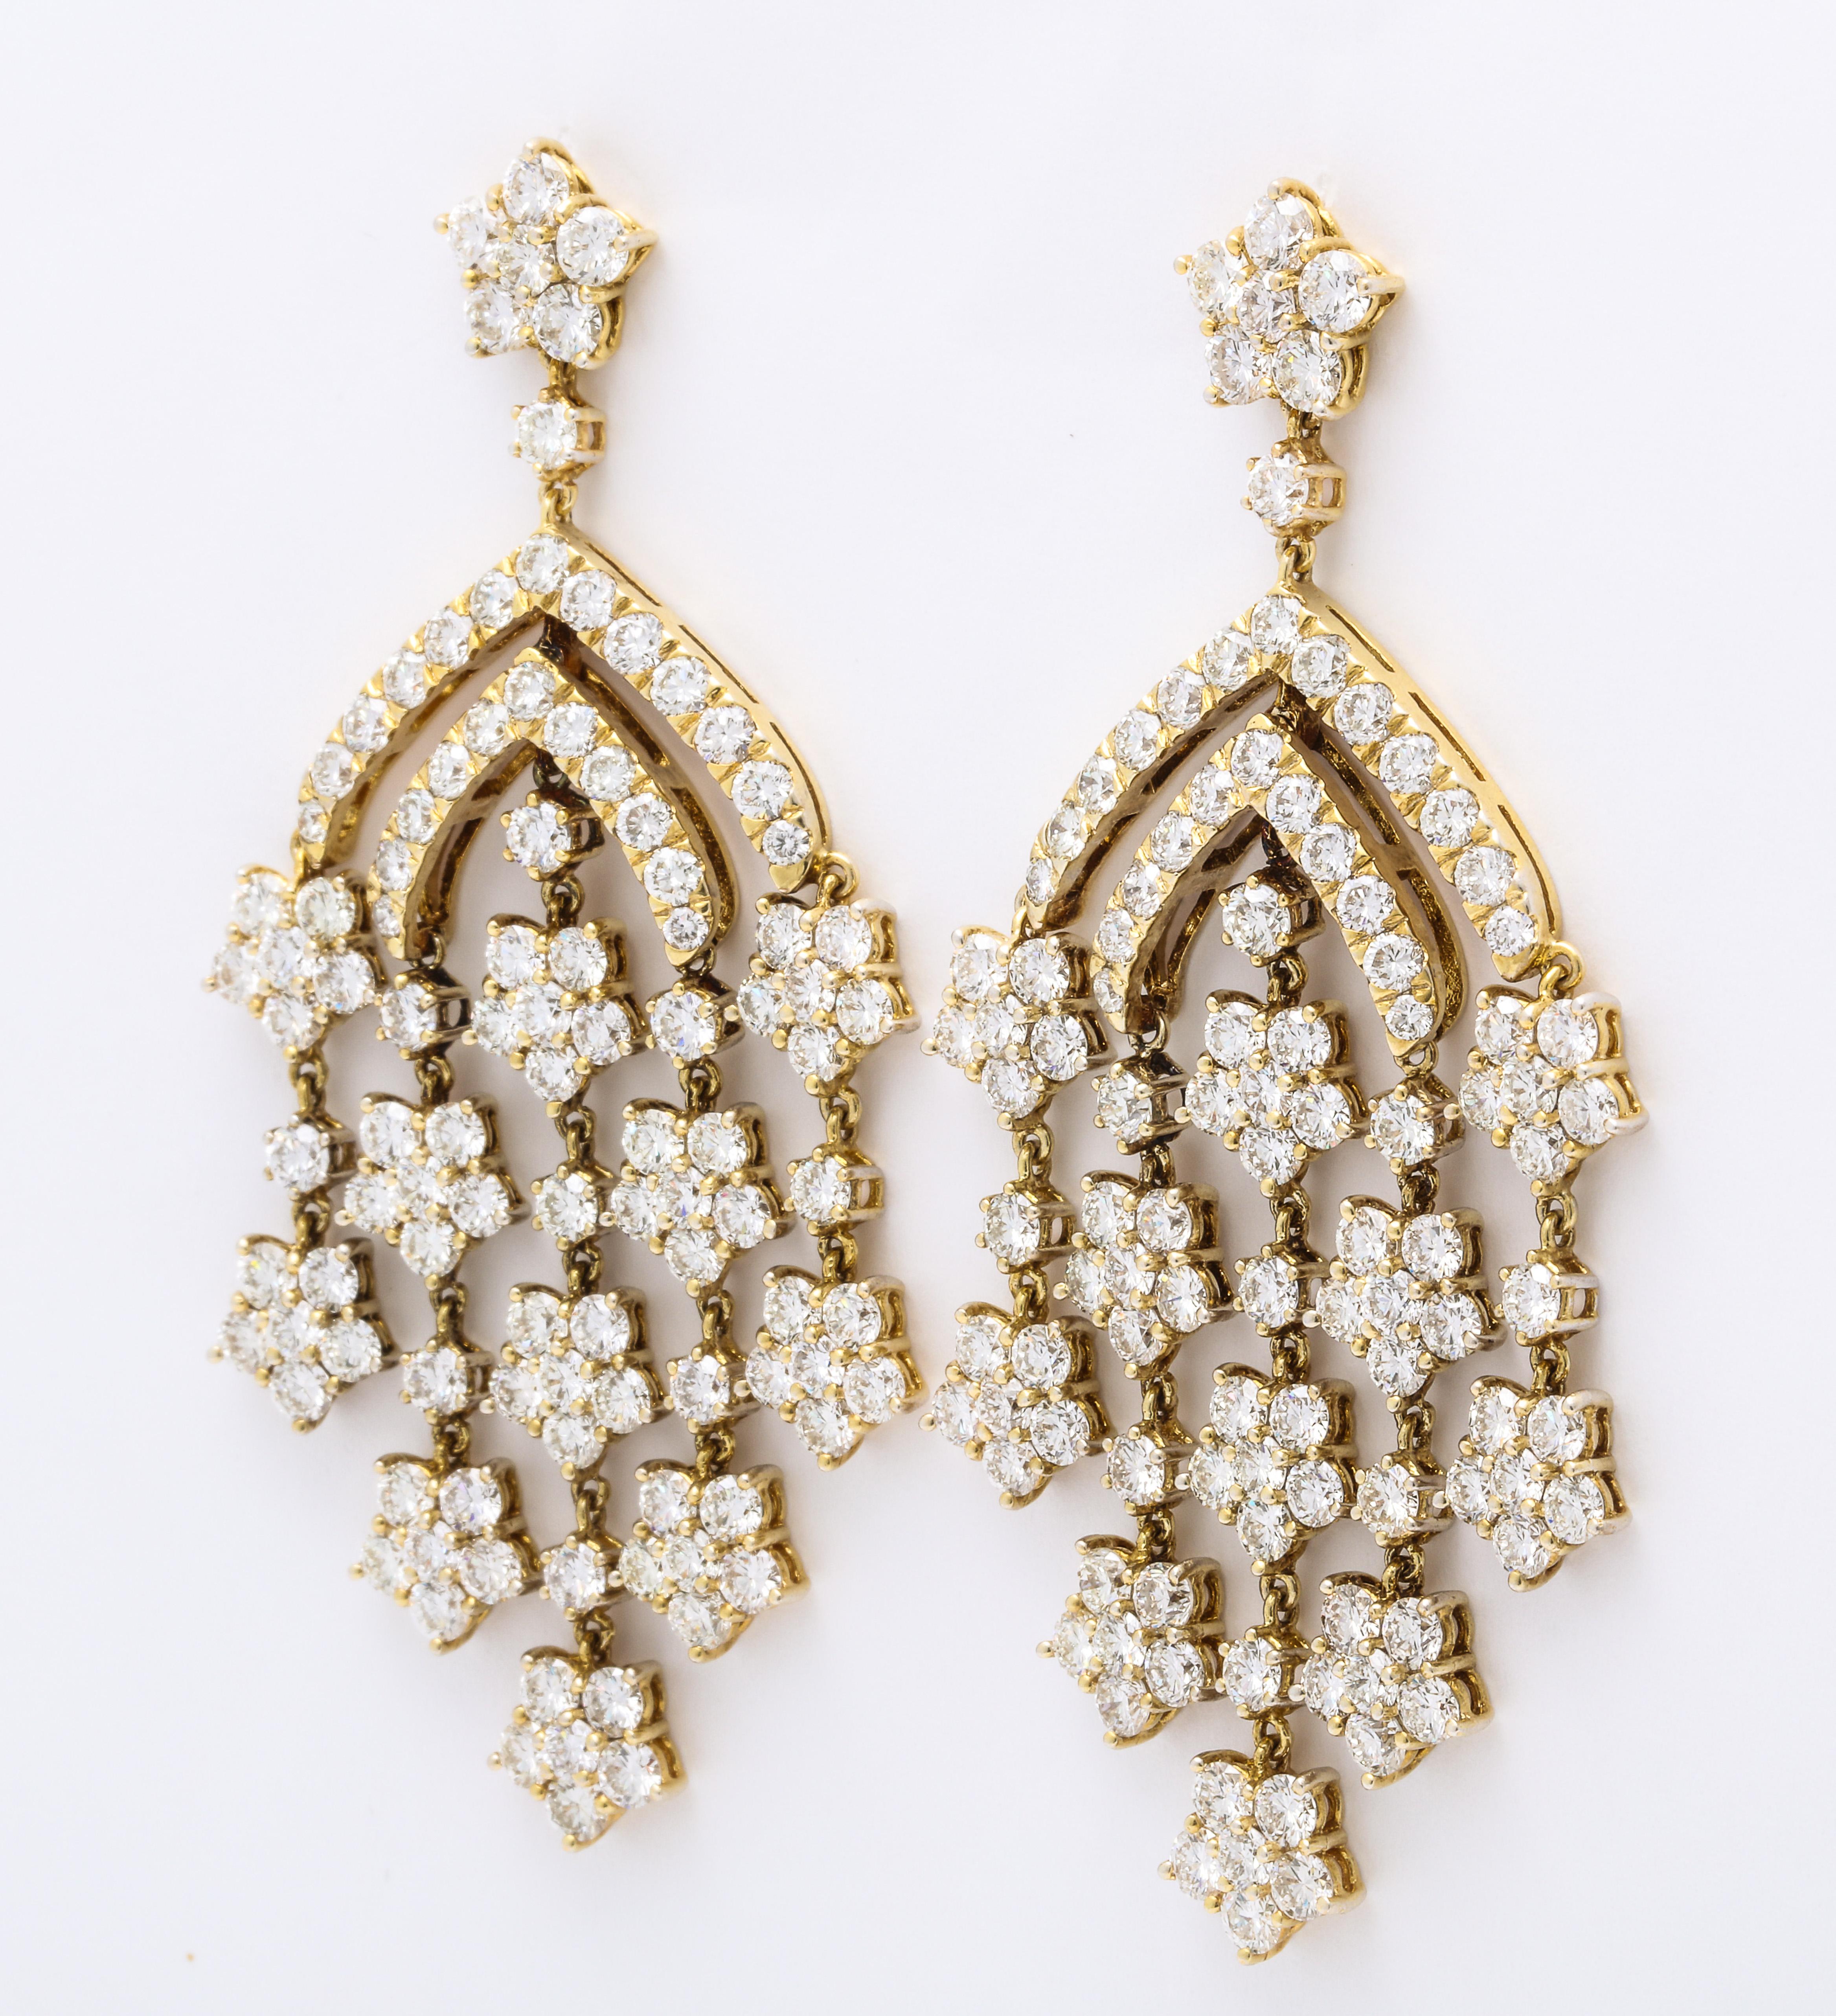 Articulating 18K yellow gold chandelier earrings suspending fringes in graduating length mounted with stylized stars decorated entirely with colorless round brilliant-cut diamonds: 17.65 carats.
Earrings are fitted with posts for pierced ears